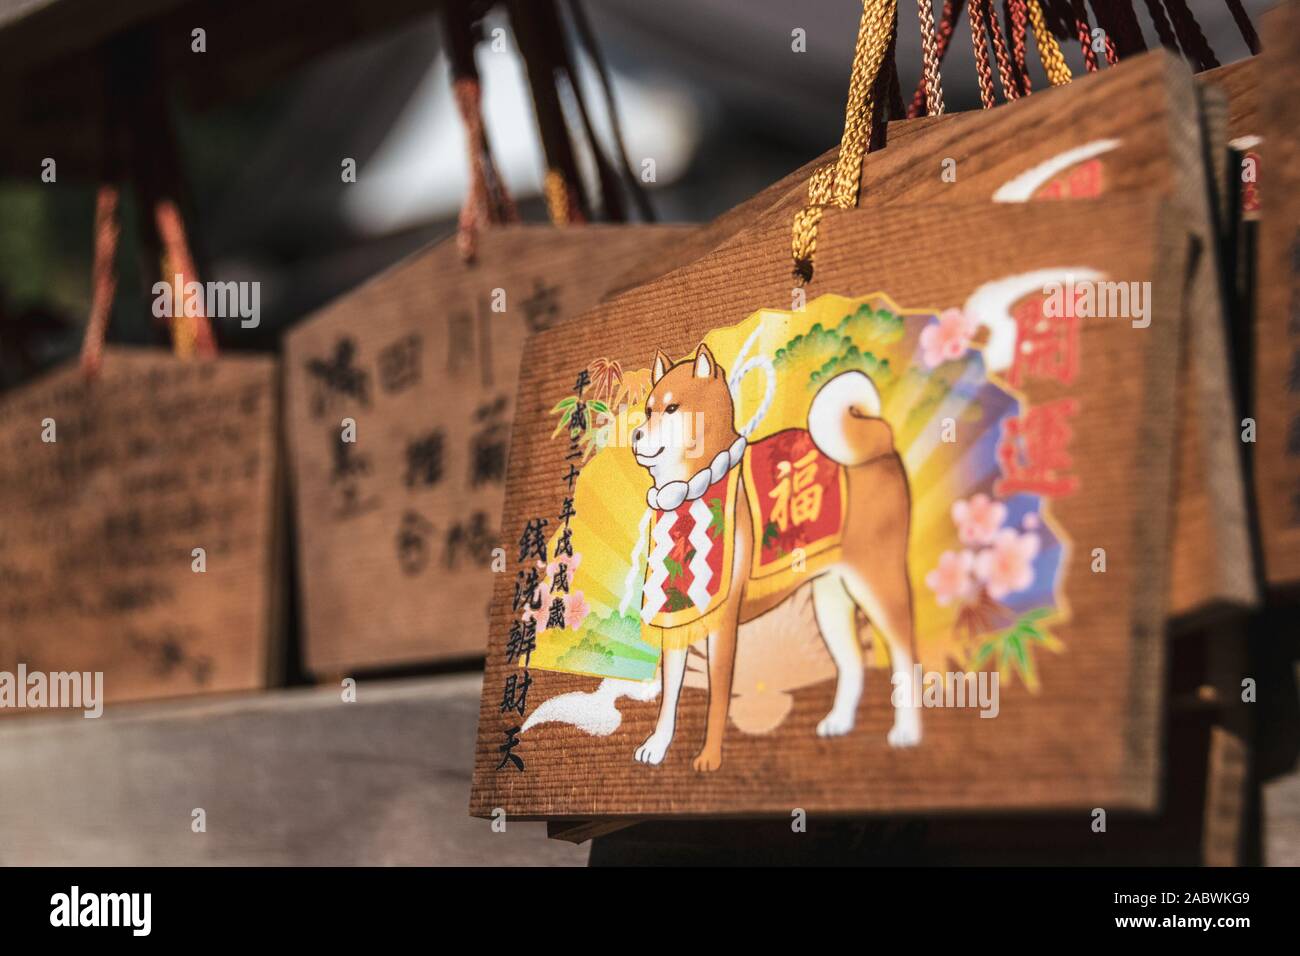 Close-up on a colorful votive plaque depicting a shiba inu dog. 'Ema' plaques are commonly for writing wishes by shinto believers. Stock Photo